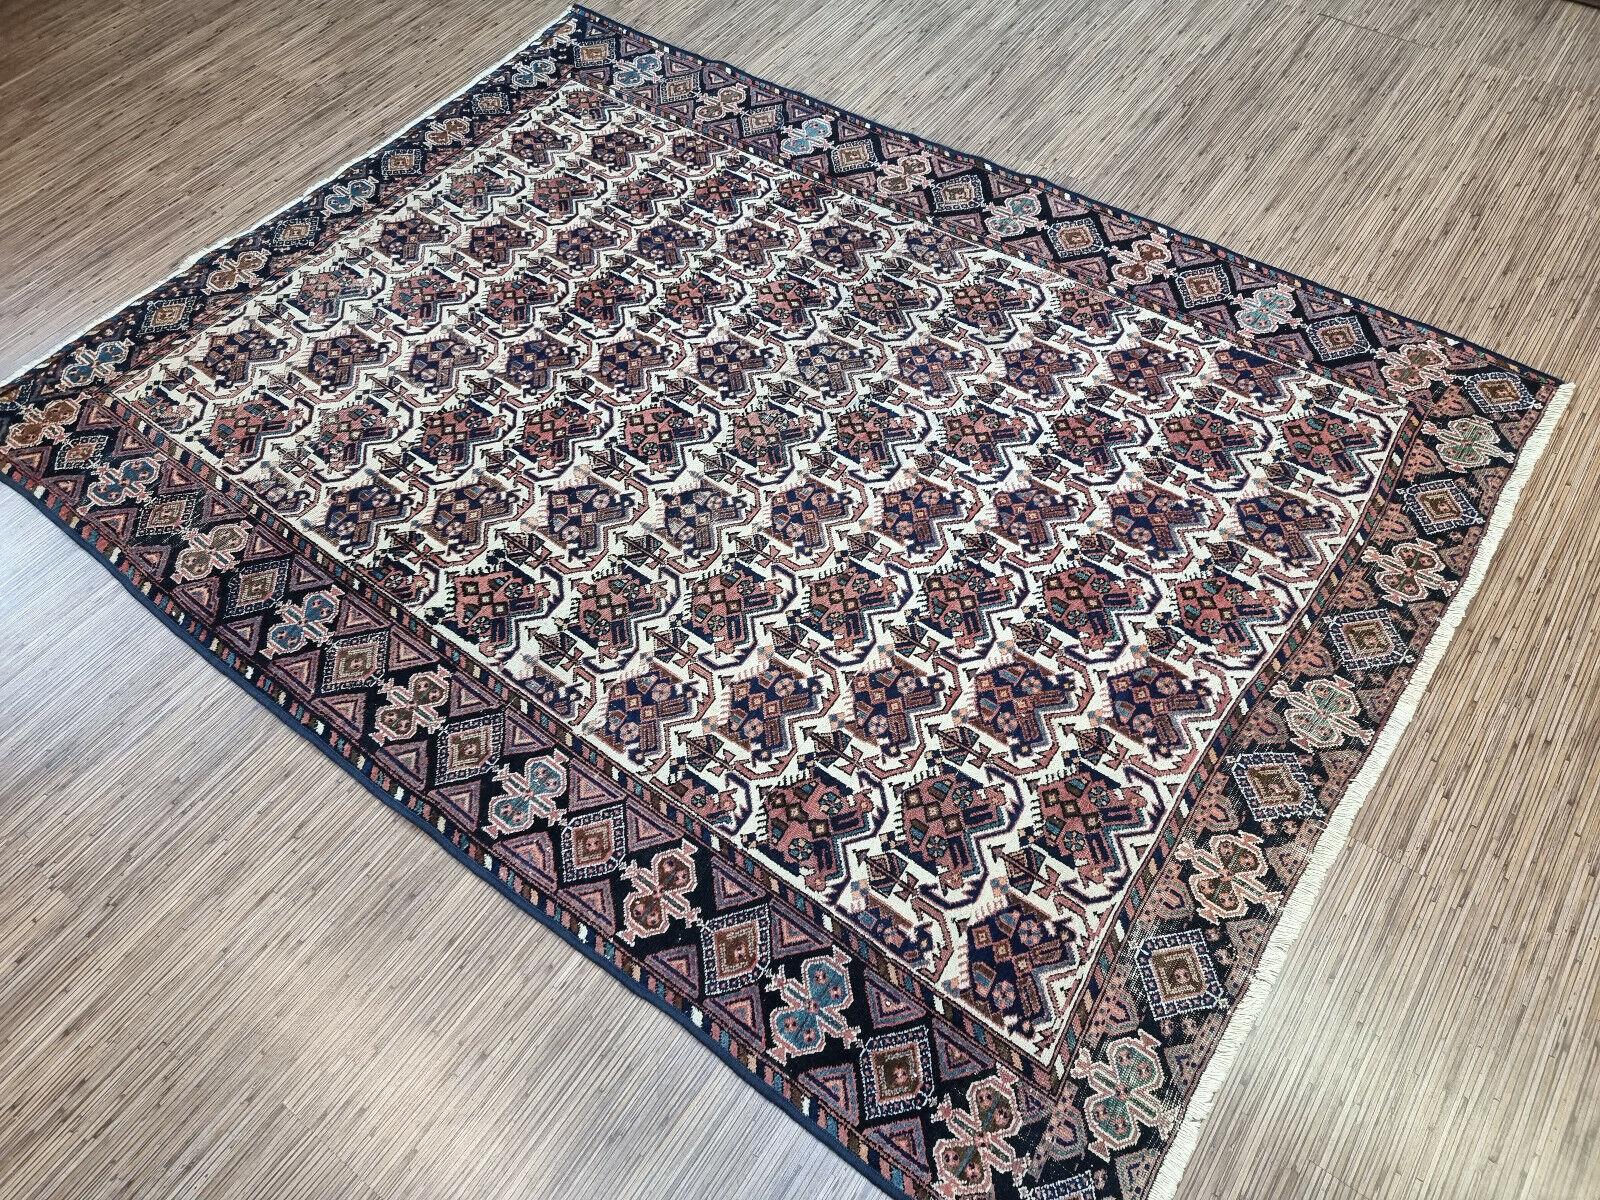 Immerse your space in the artistry of the Middle East with our Handmade Antique Persian Style Afshar Rug. Crafted meticulously in the 1920s, this piece measures a generous 5.3’ x 6.9’, offering ample coverage for your floor.

The rug boasts an